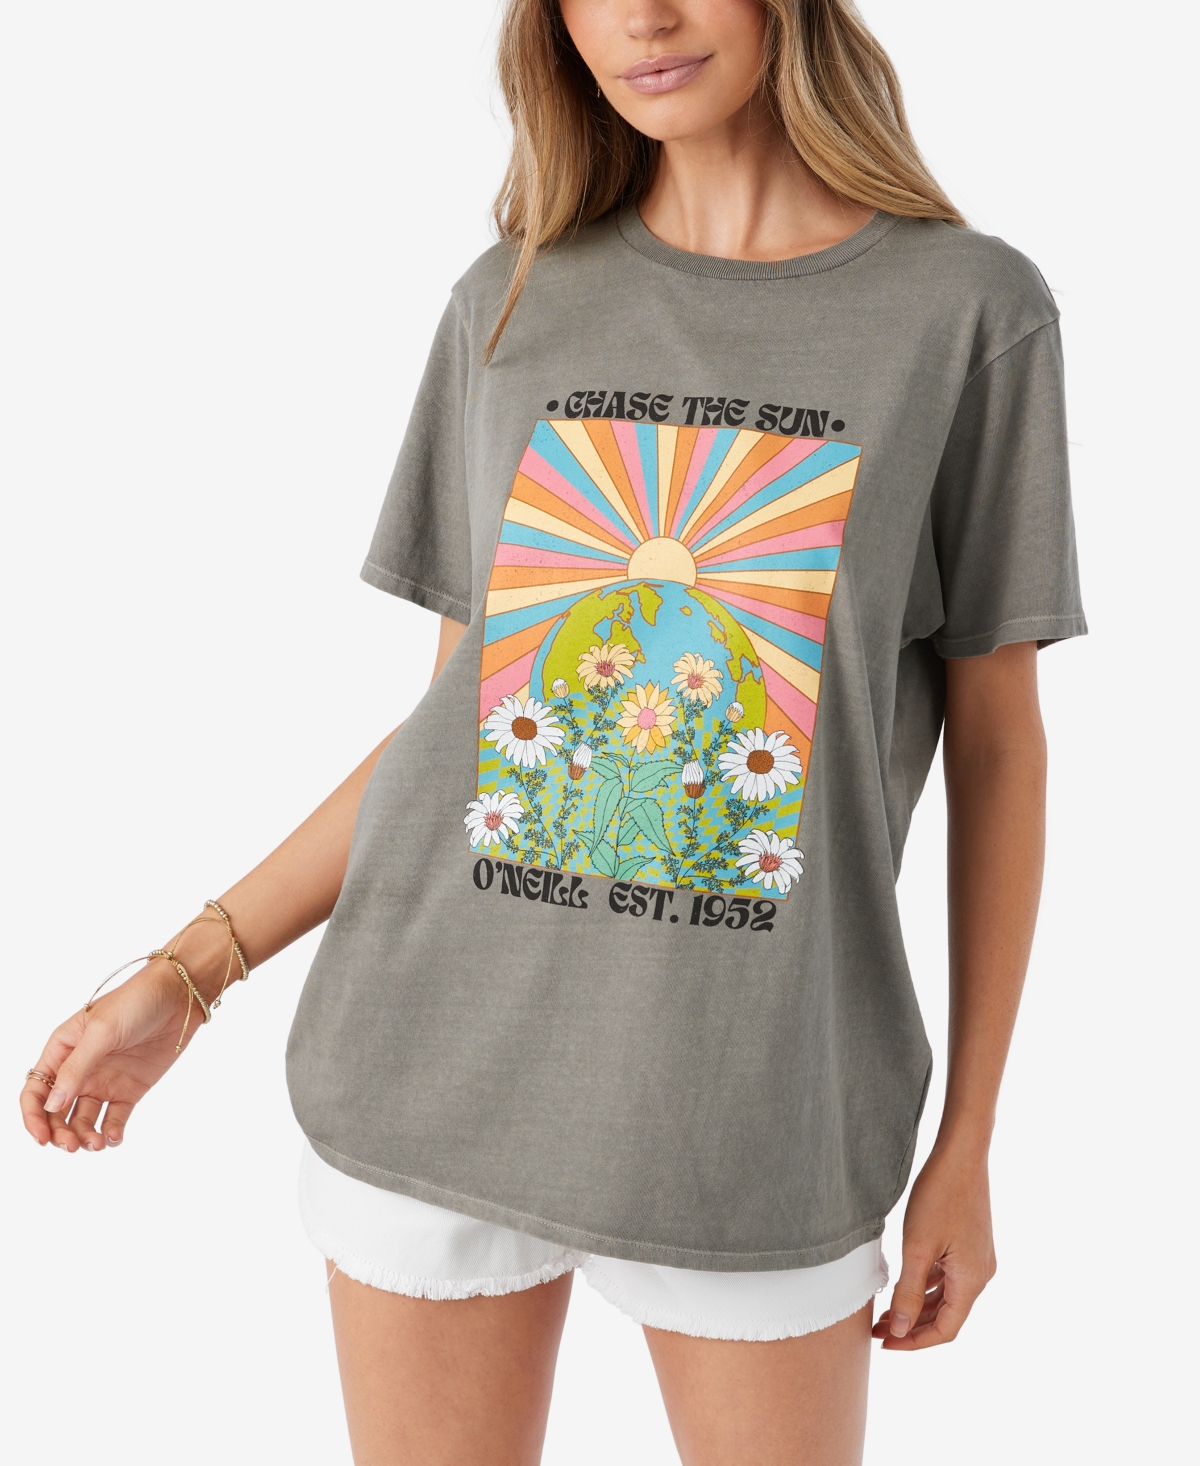 O'NEILL O'NEILL JUNIORS' CHASE THE SUN GRAPHIC T-SHIRT